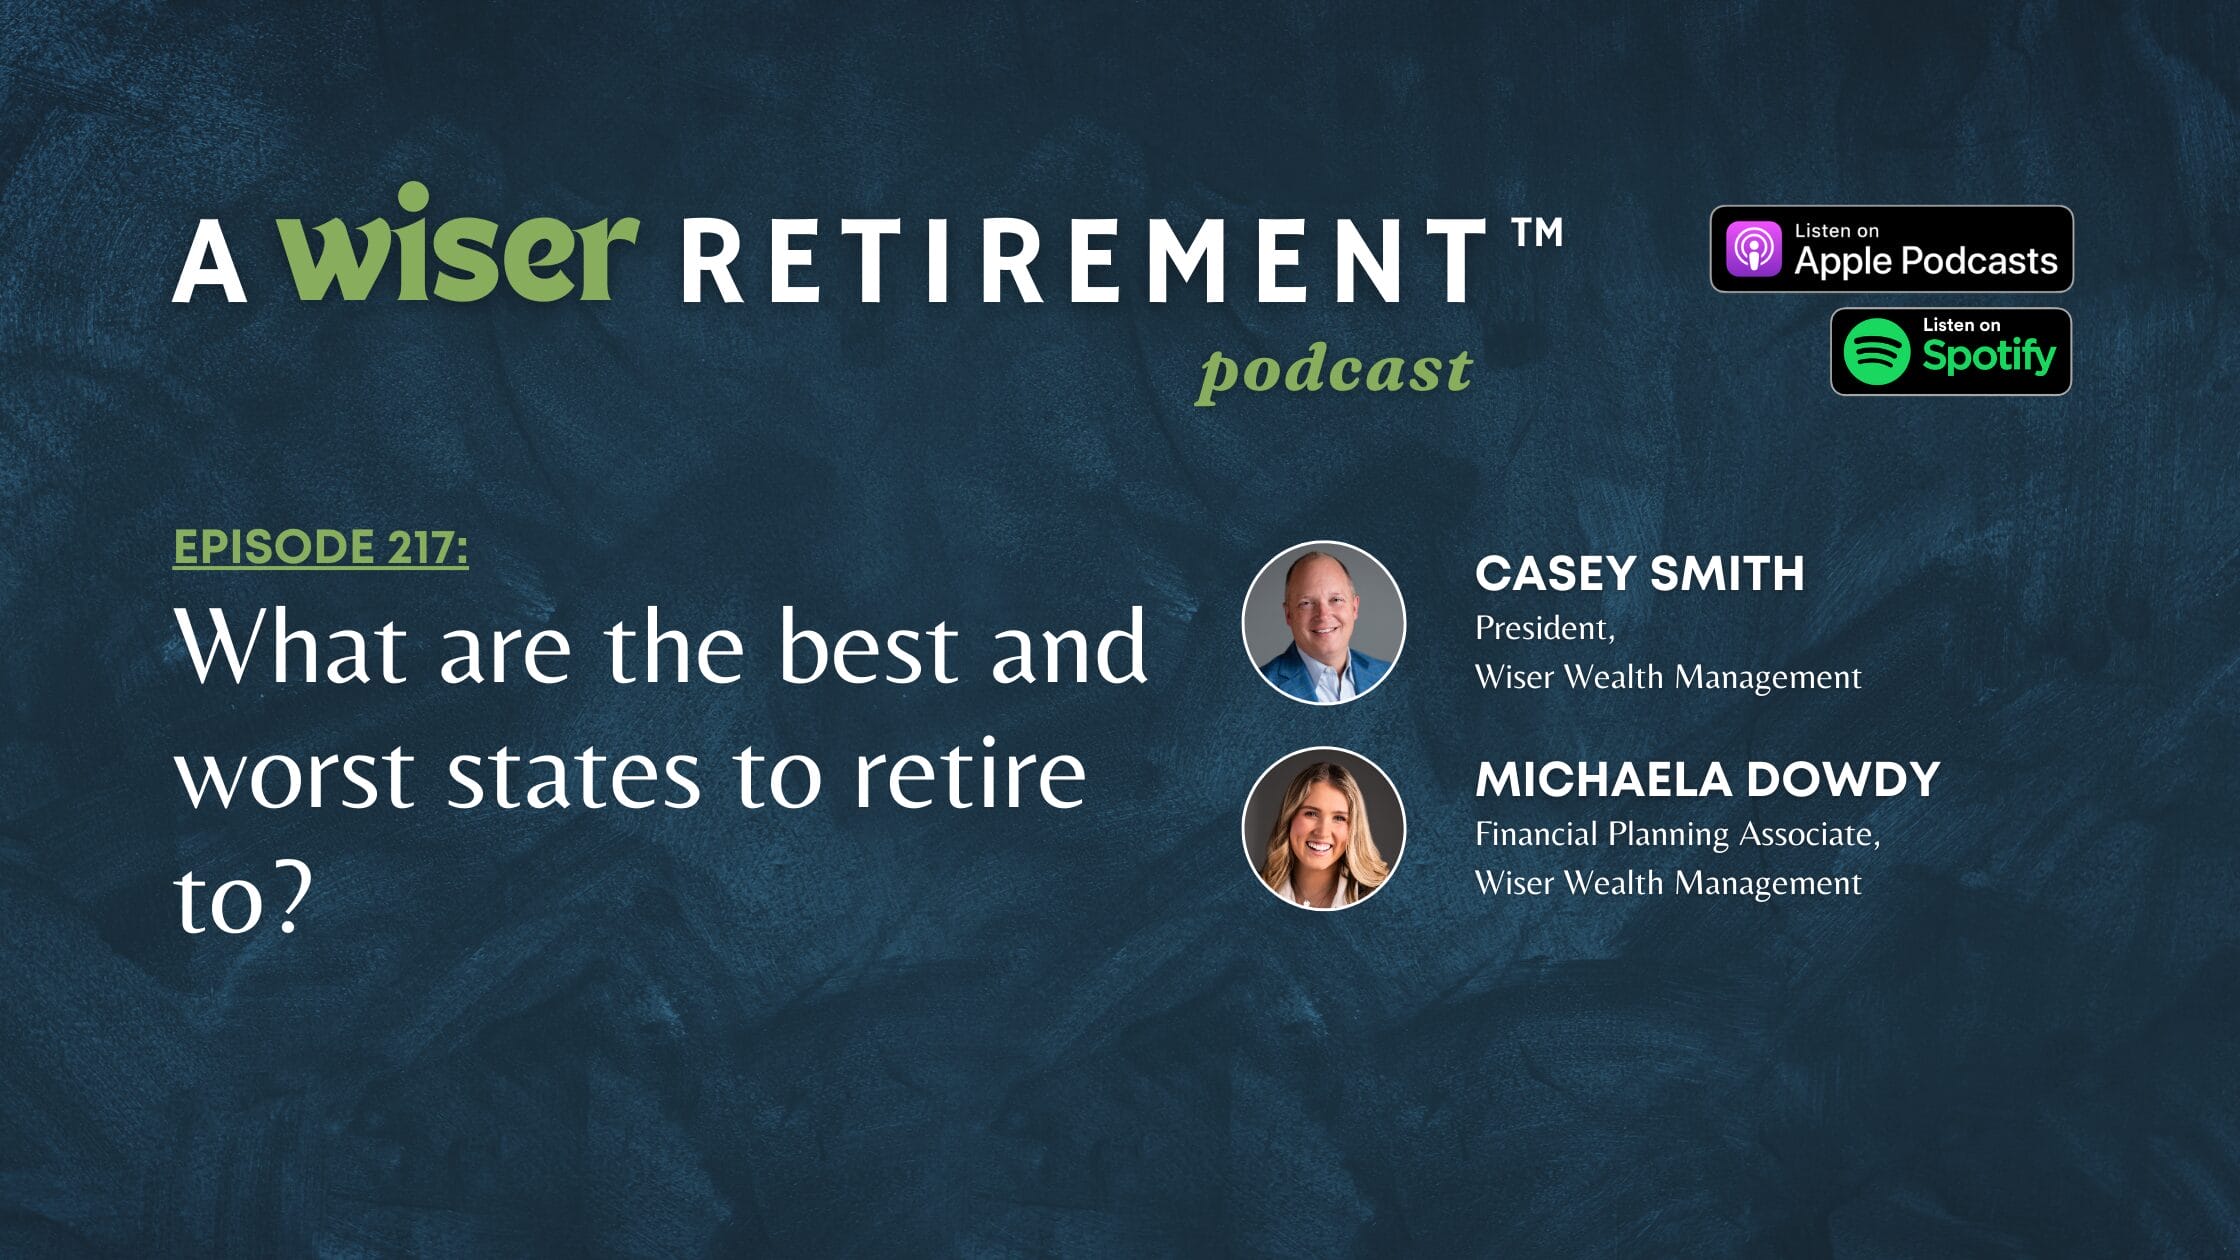 What are the best and worst states to retire to?